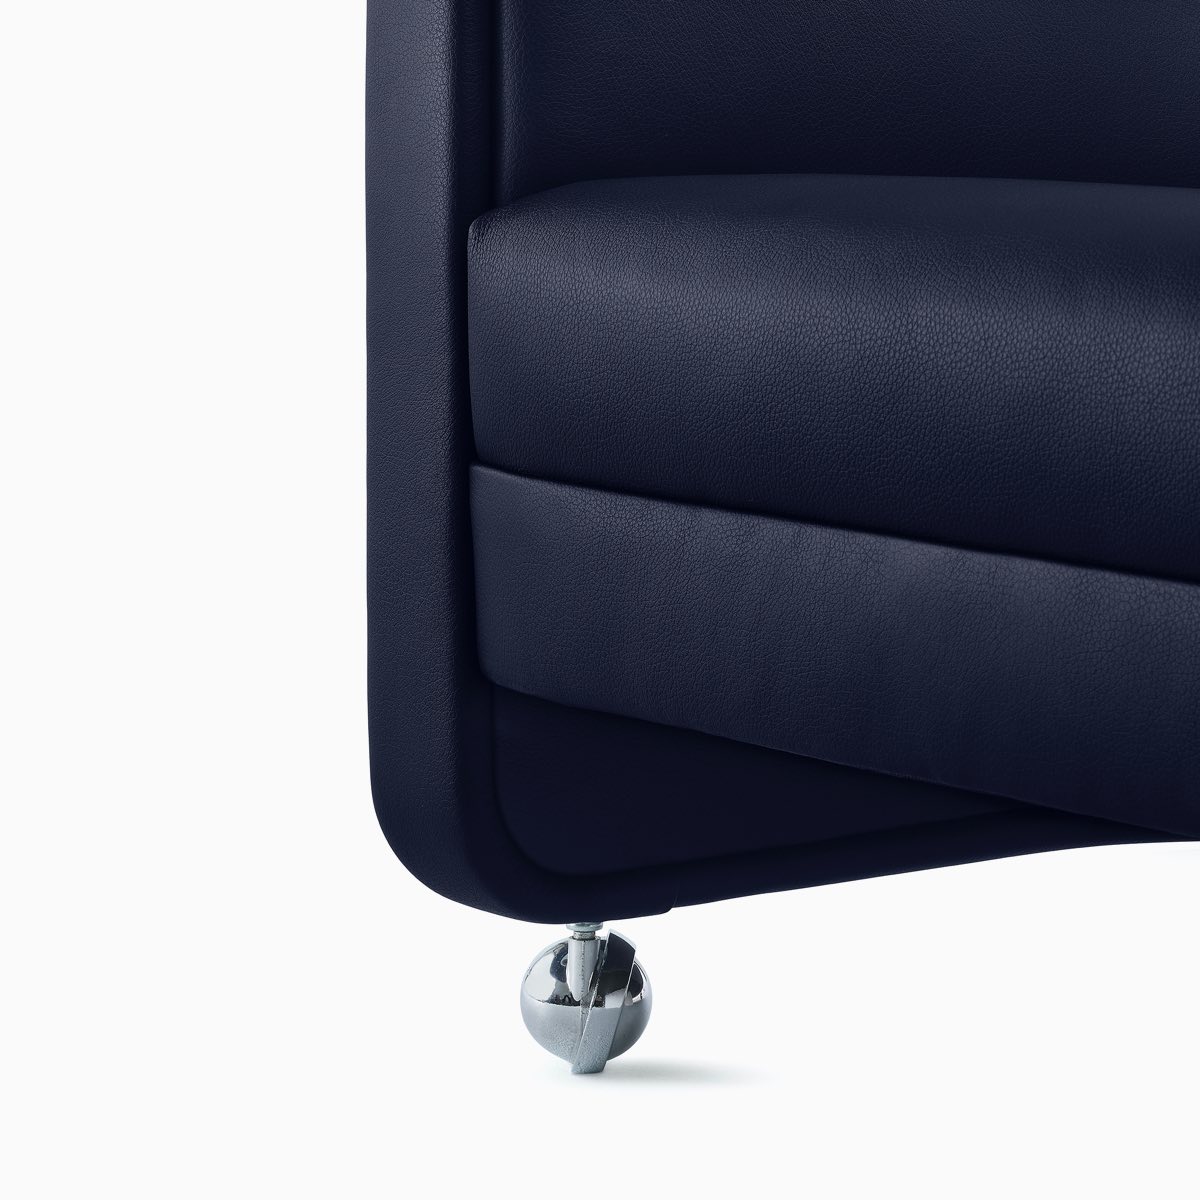 Detail shot of the caster on the U-Series Lounge Chair upholstered in Tenera Sapphire.